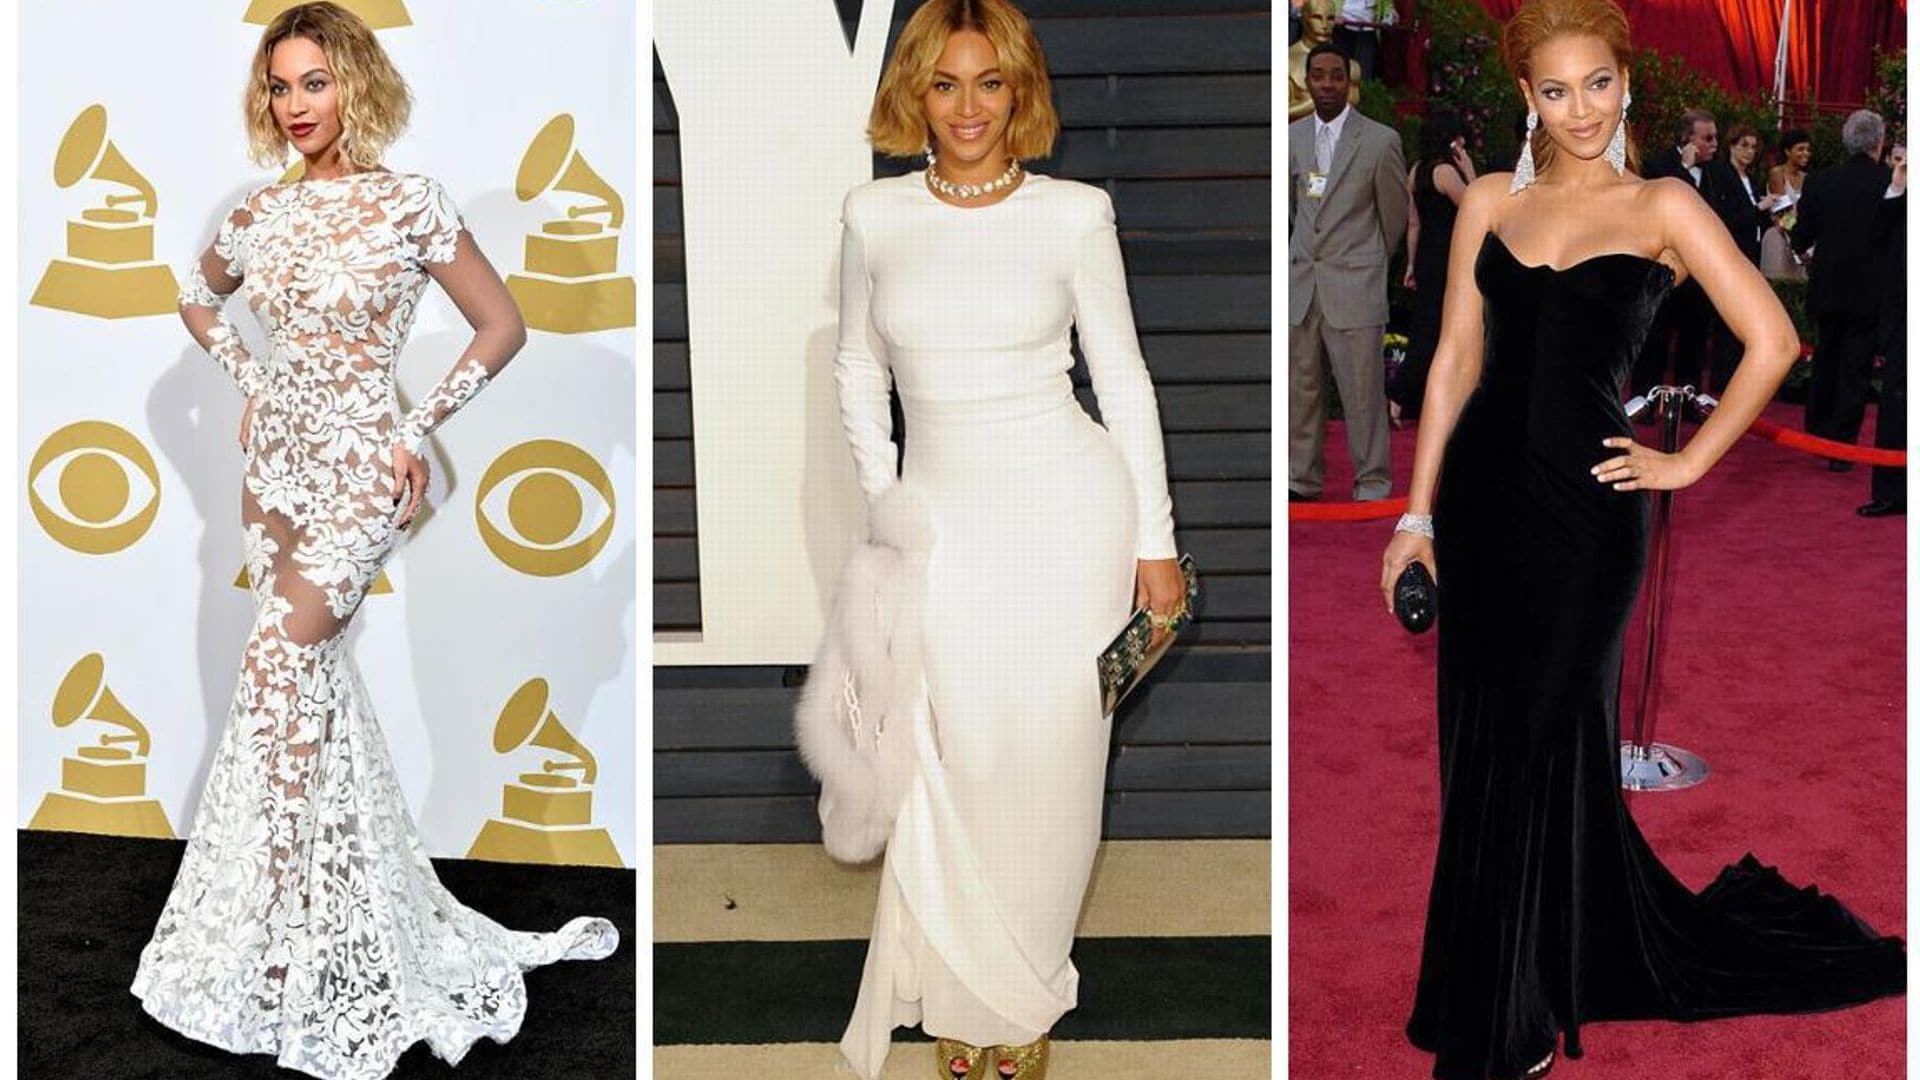 We take a look back at some of Beyonce's best dresses